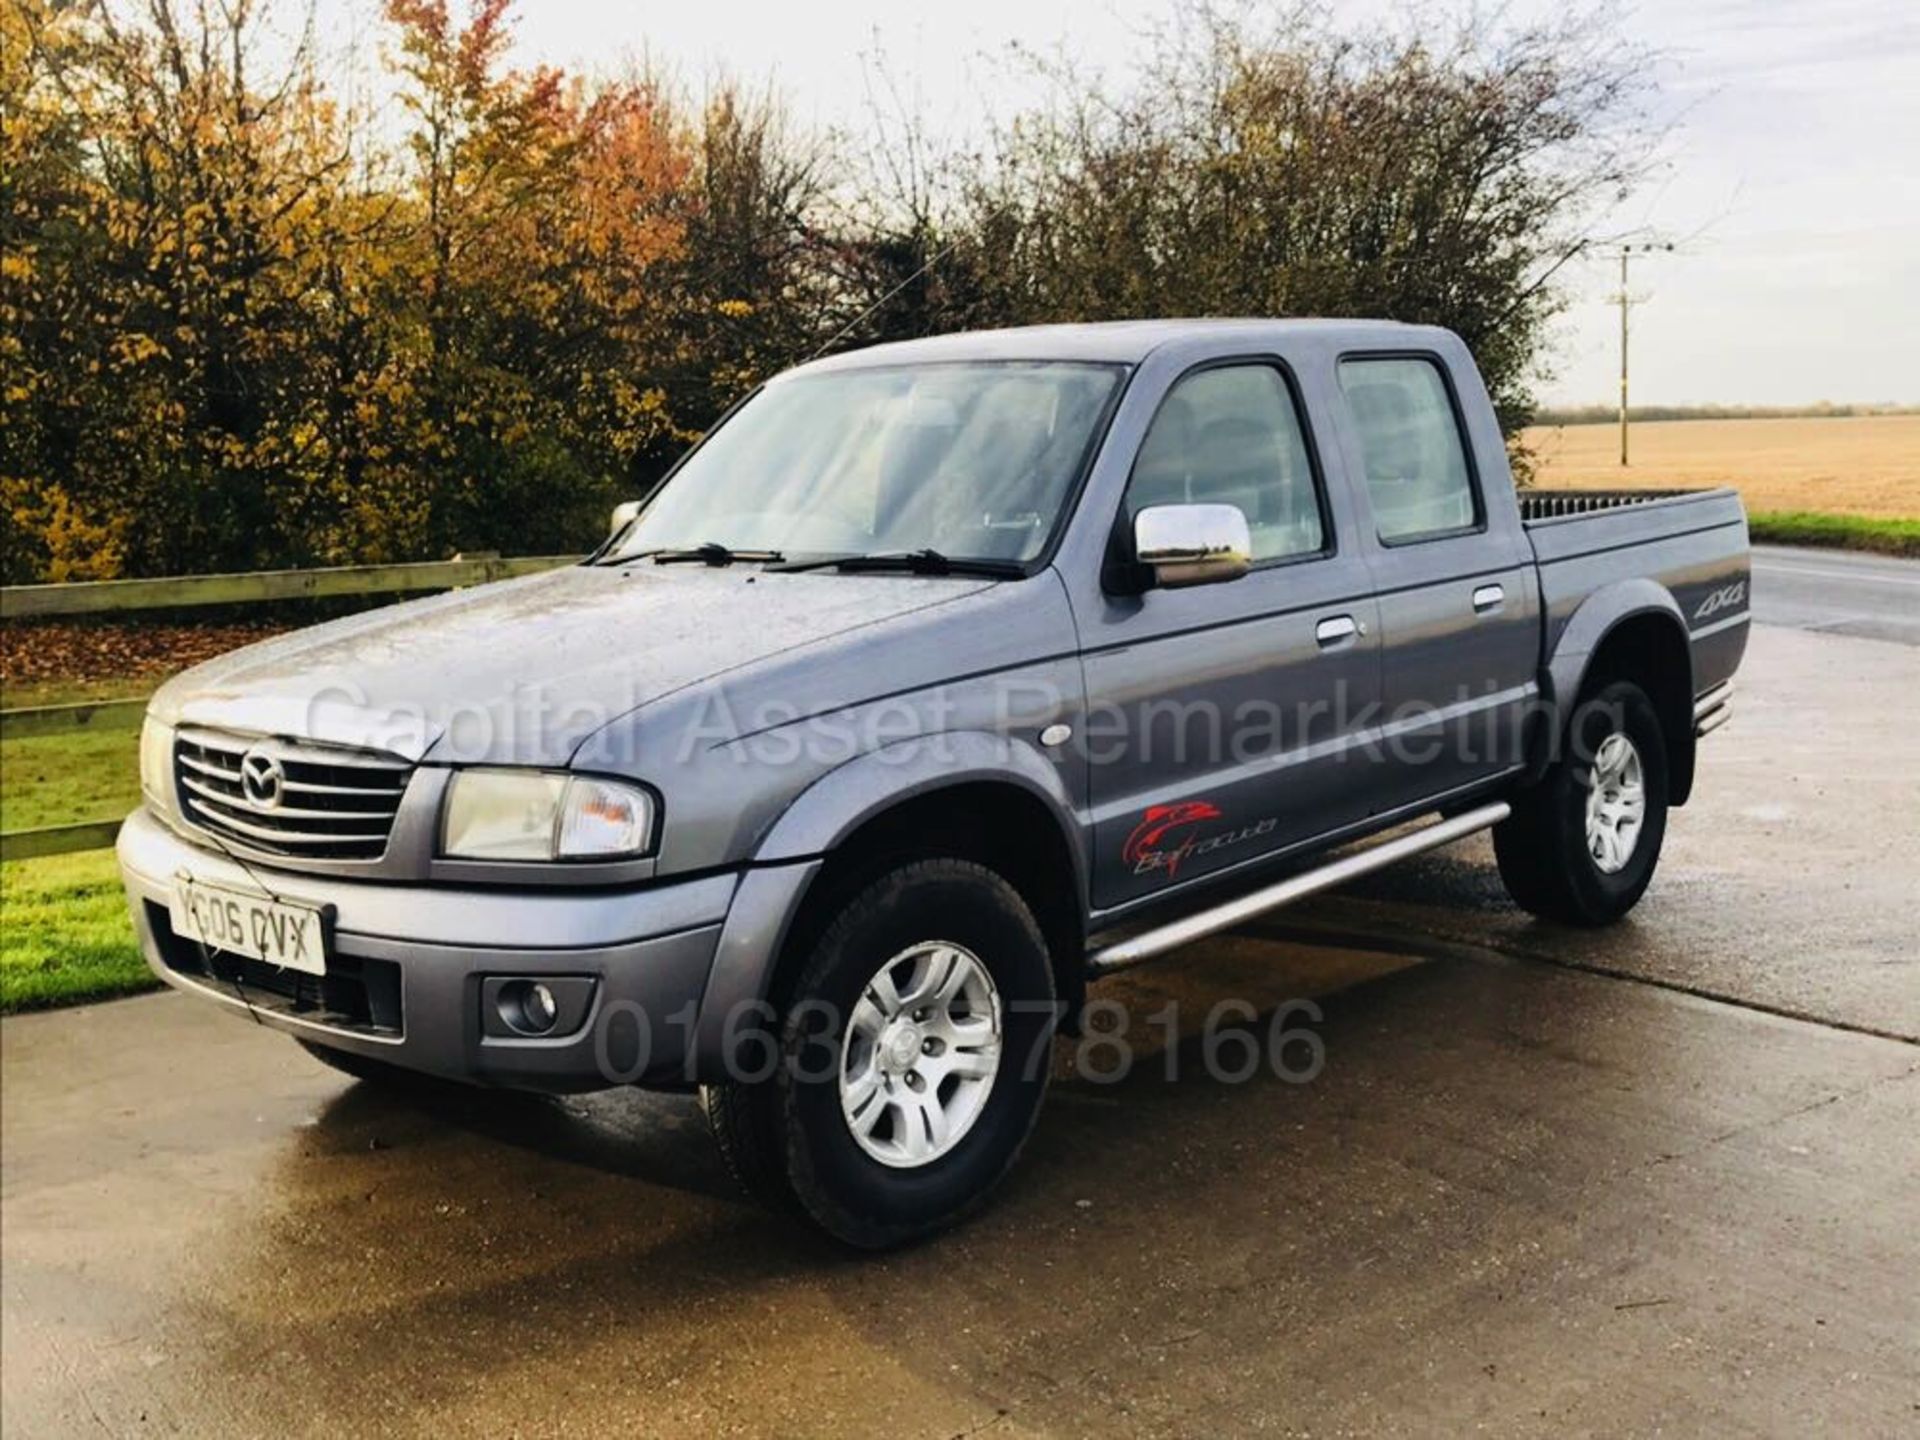 MAZDA B2500 '4-STYLE DOUBLE CAB PICK-UP' (2006 - 06 REG) '2.5 DIESEL - 109 BHP' *AIR CON* (NO VAT) - Image 3 of 18